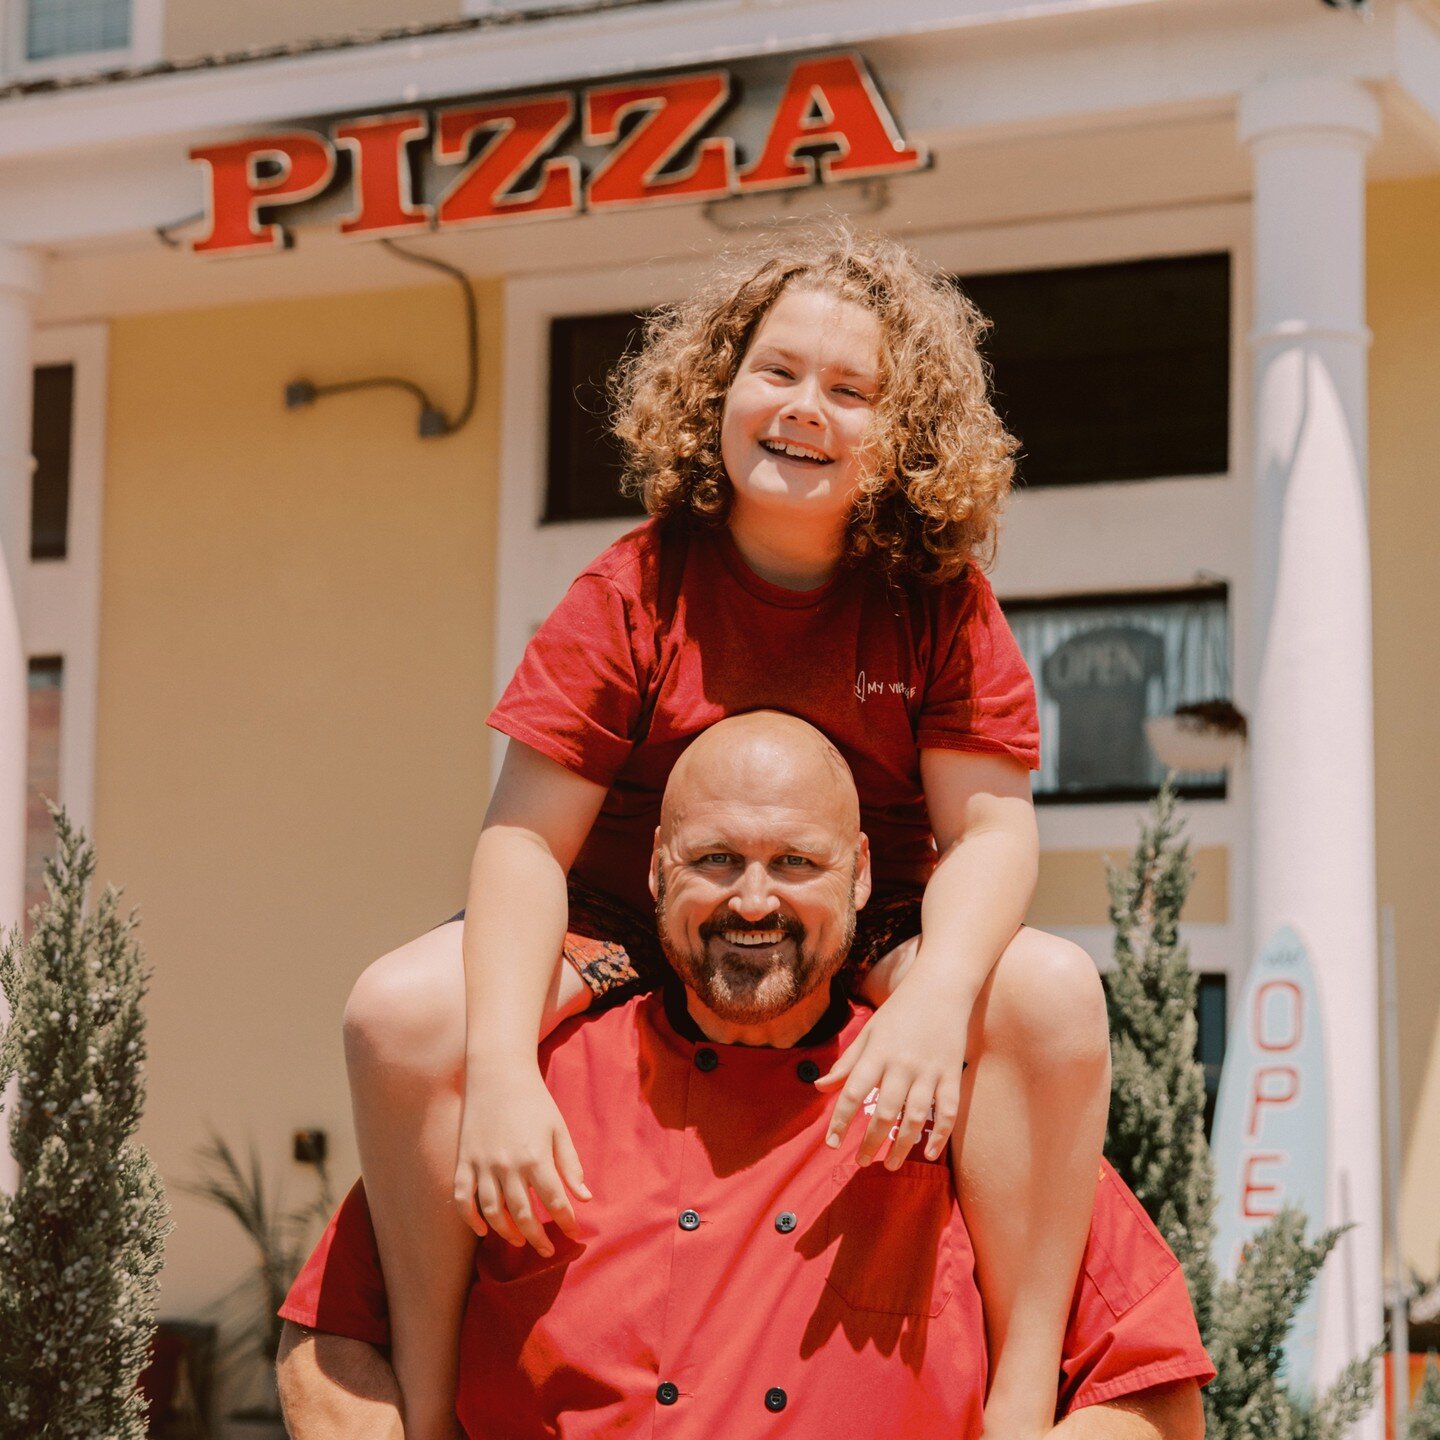 As the busy season approaches at #villagepizzaobx, I feel blessed and fortunate to have the opportunity to serve our community with delicious food and good company. 

However, this Sunday is bittersweet for me, as it marks the last day I get to spend